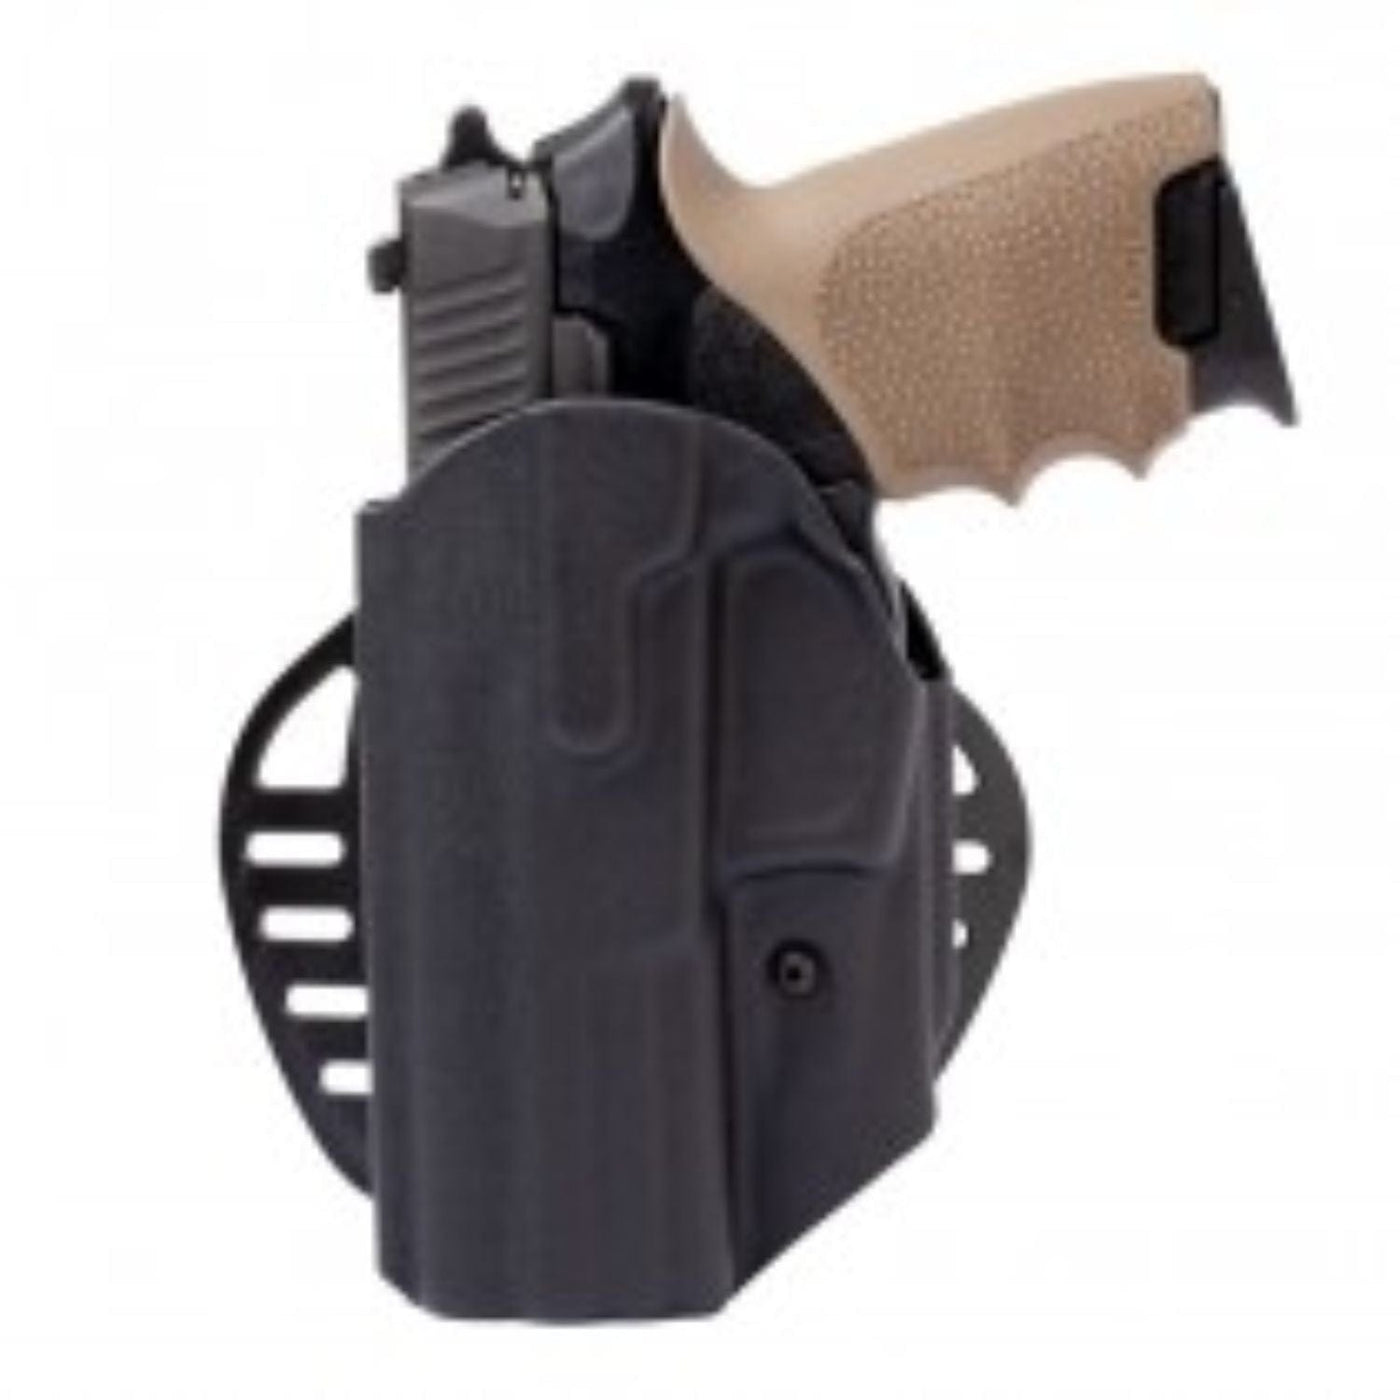 Hogue Hogue ARS Stage 1 Carry Holster Sig Sauer P229 Black Left hand Shooting